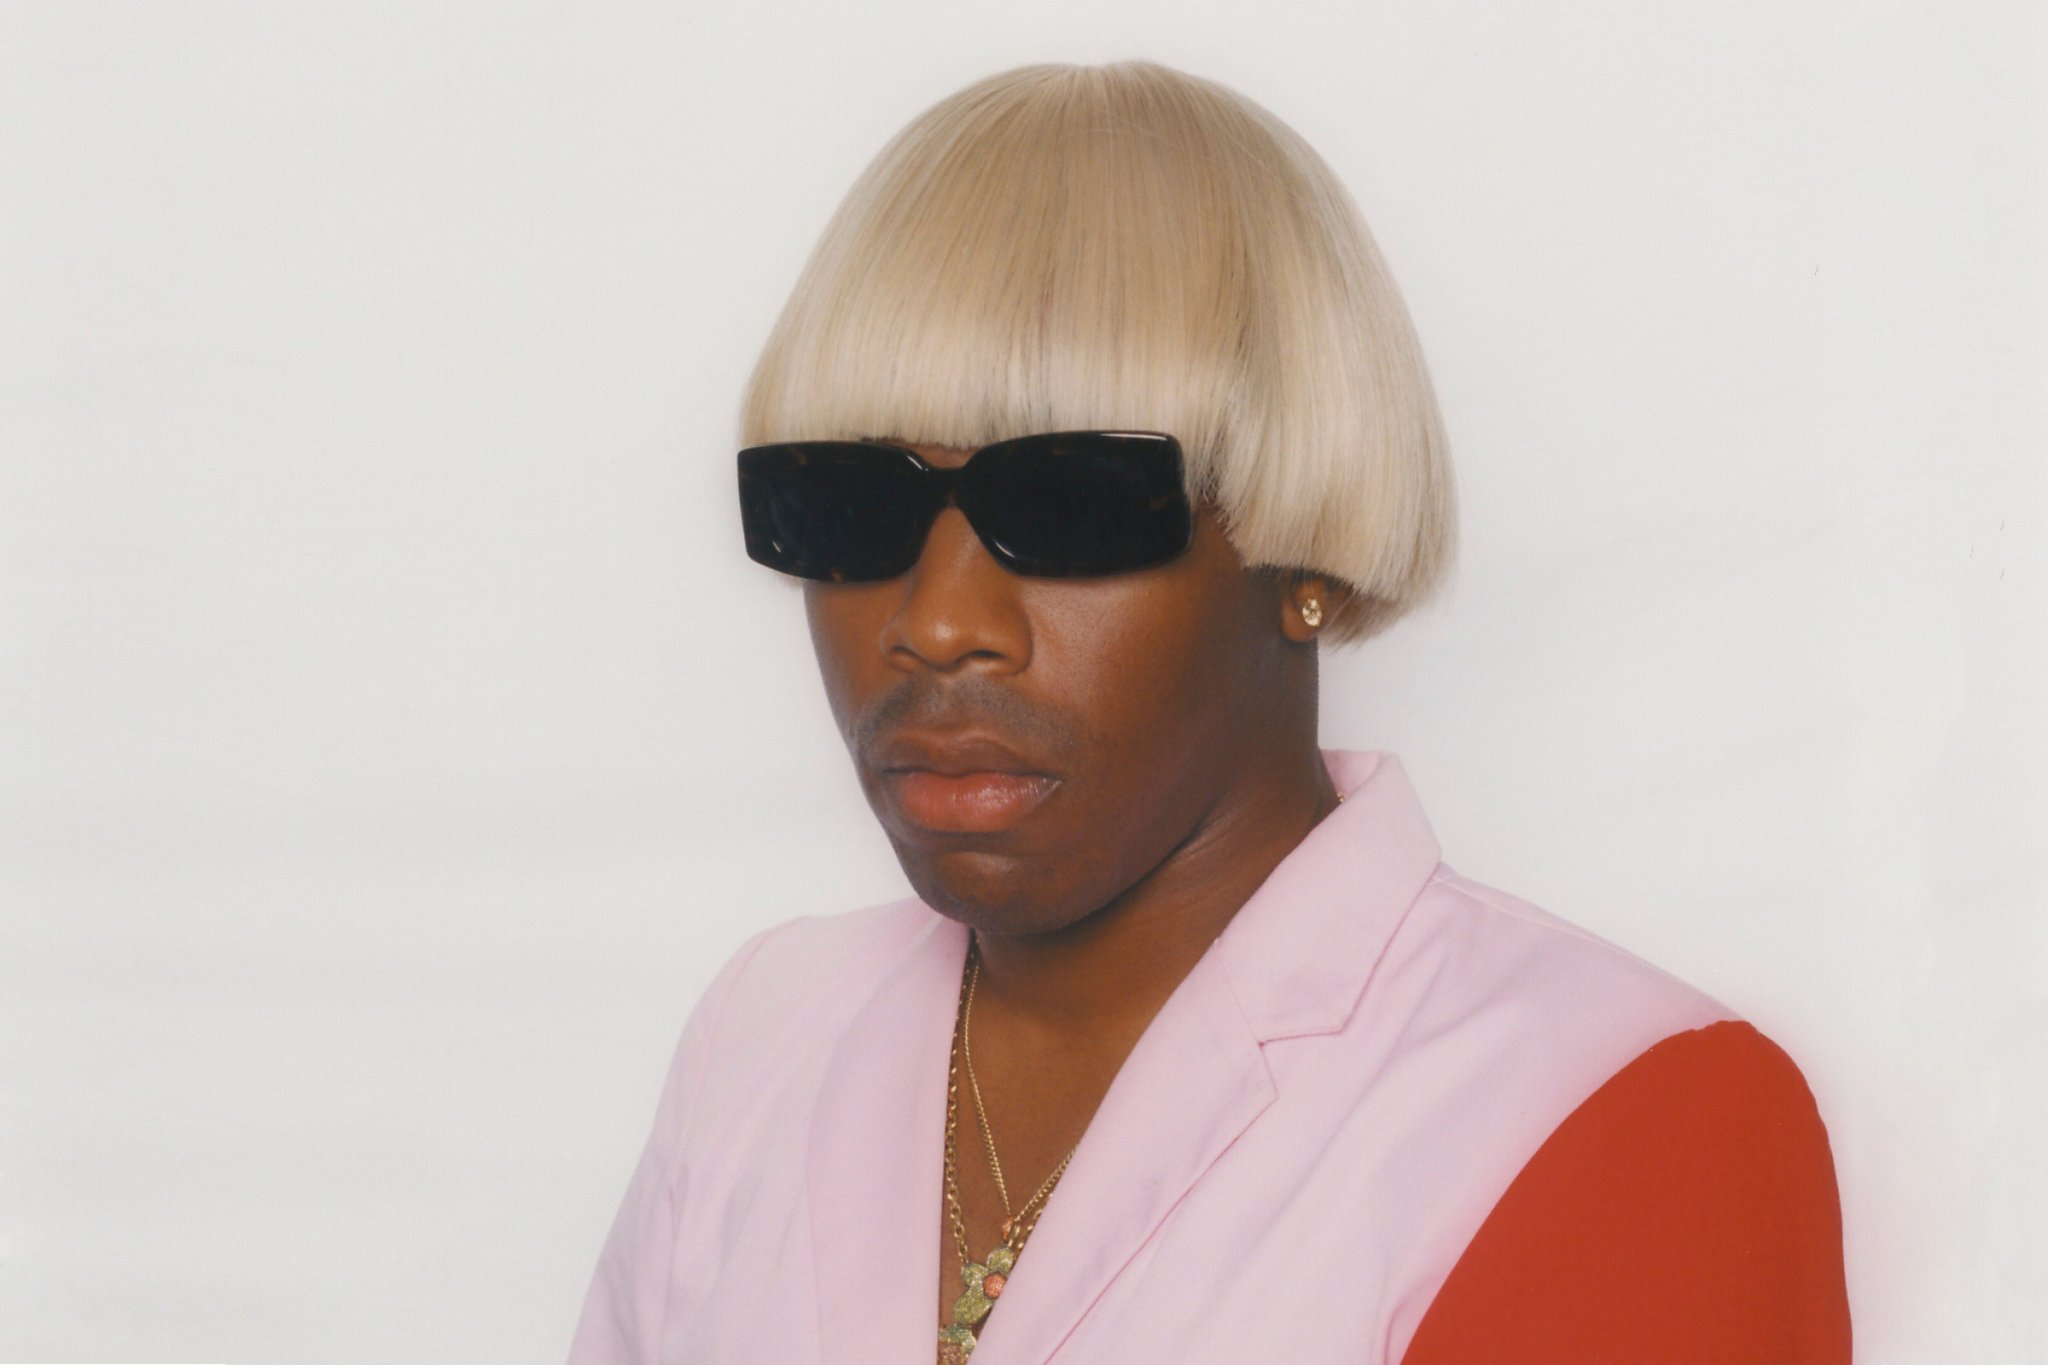 Review Tyler The Creator Flips His Wig On ‘igor